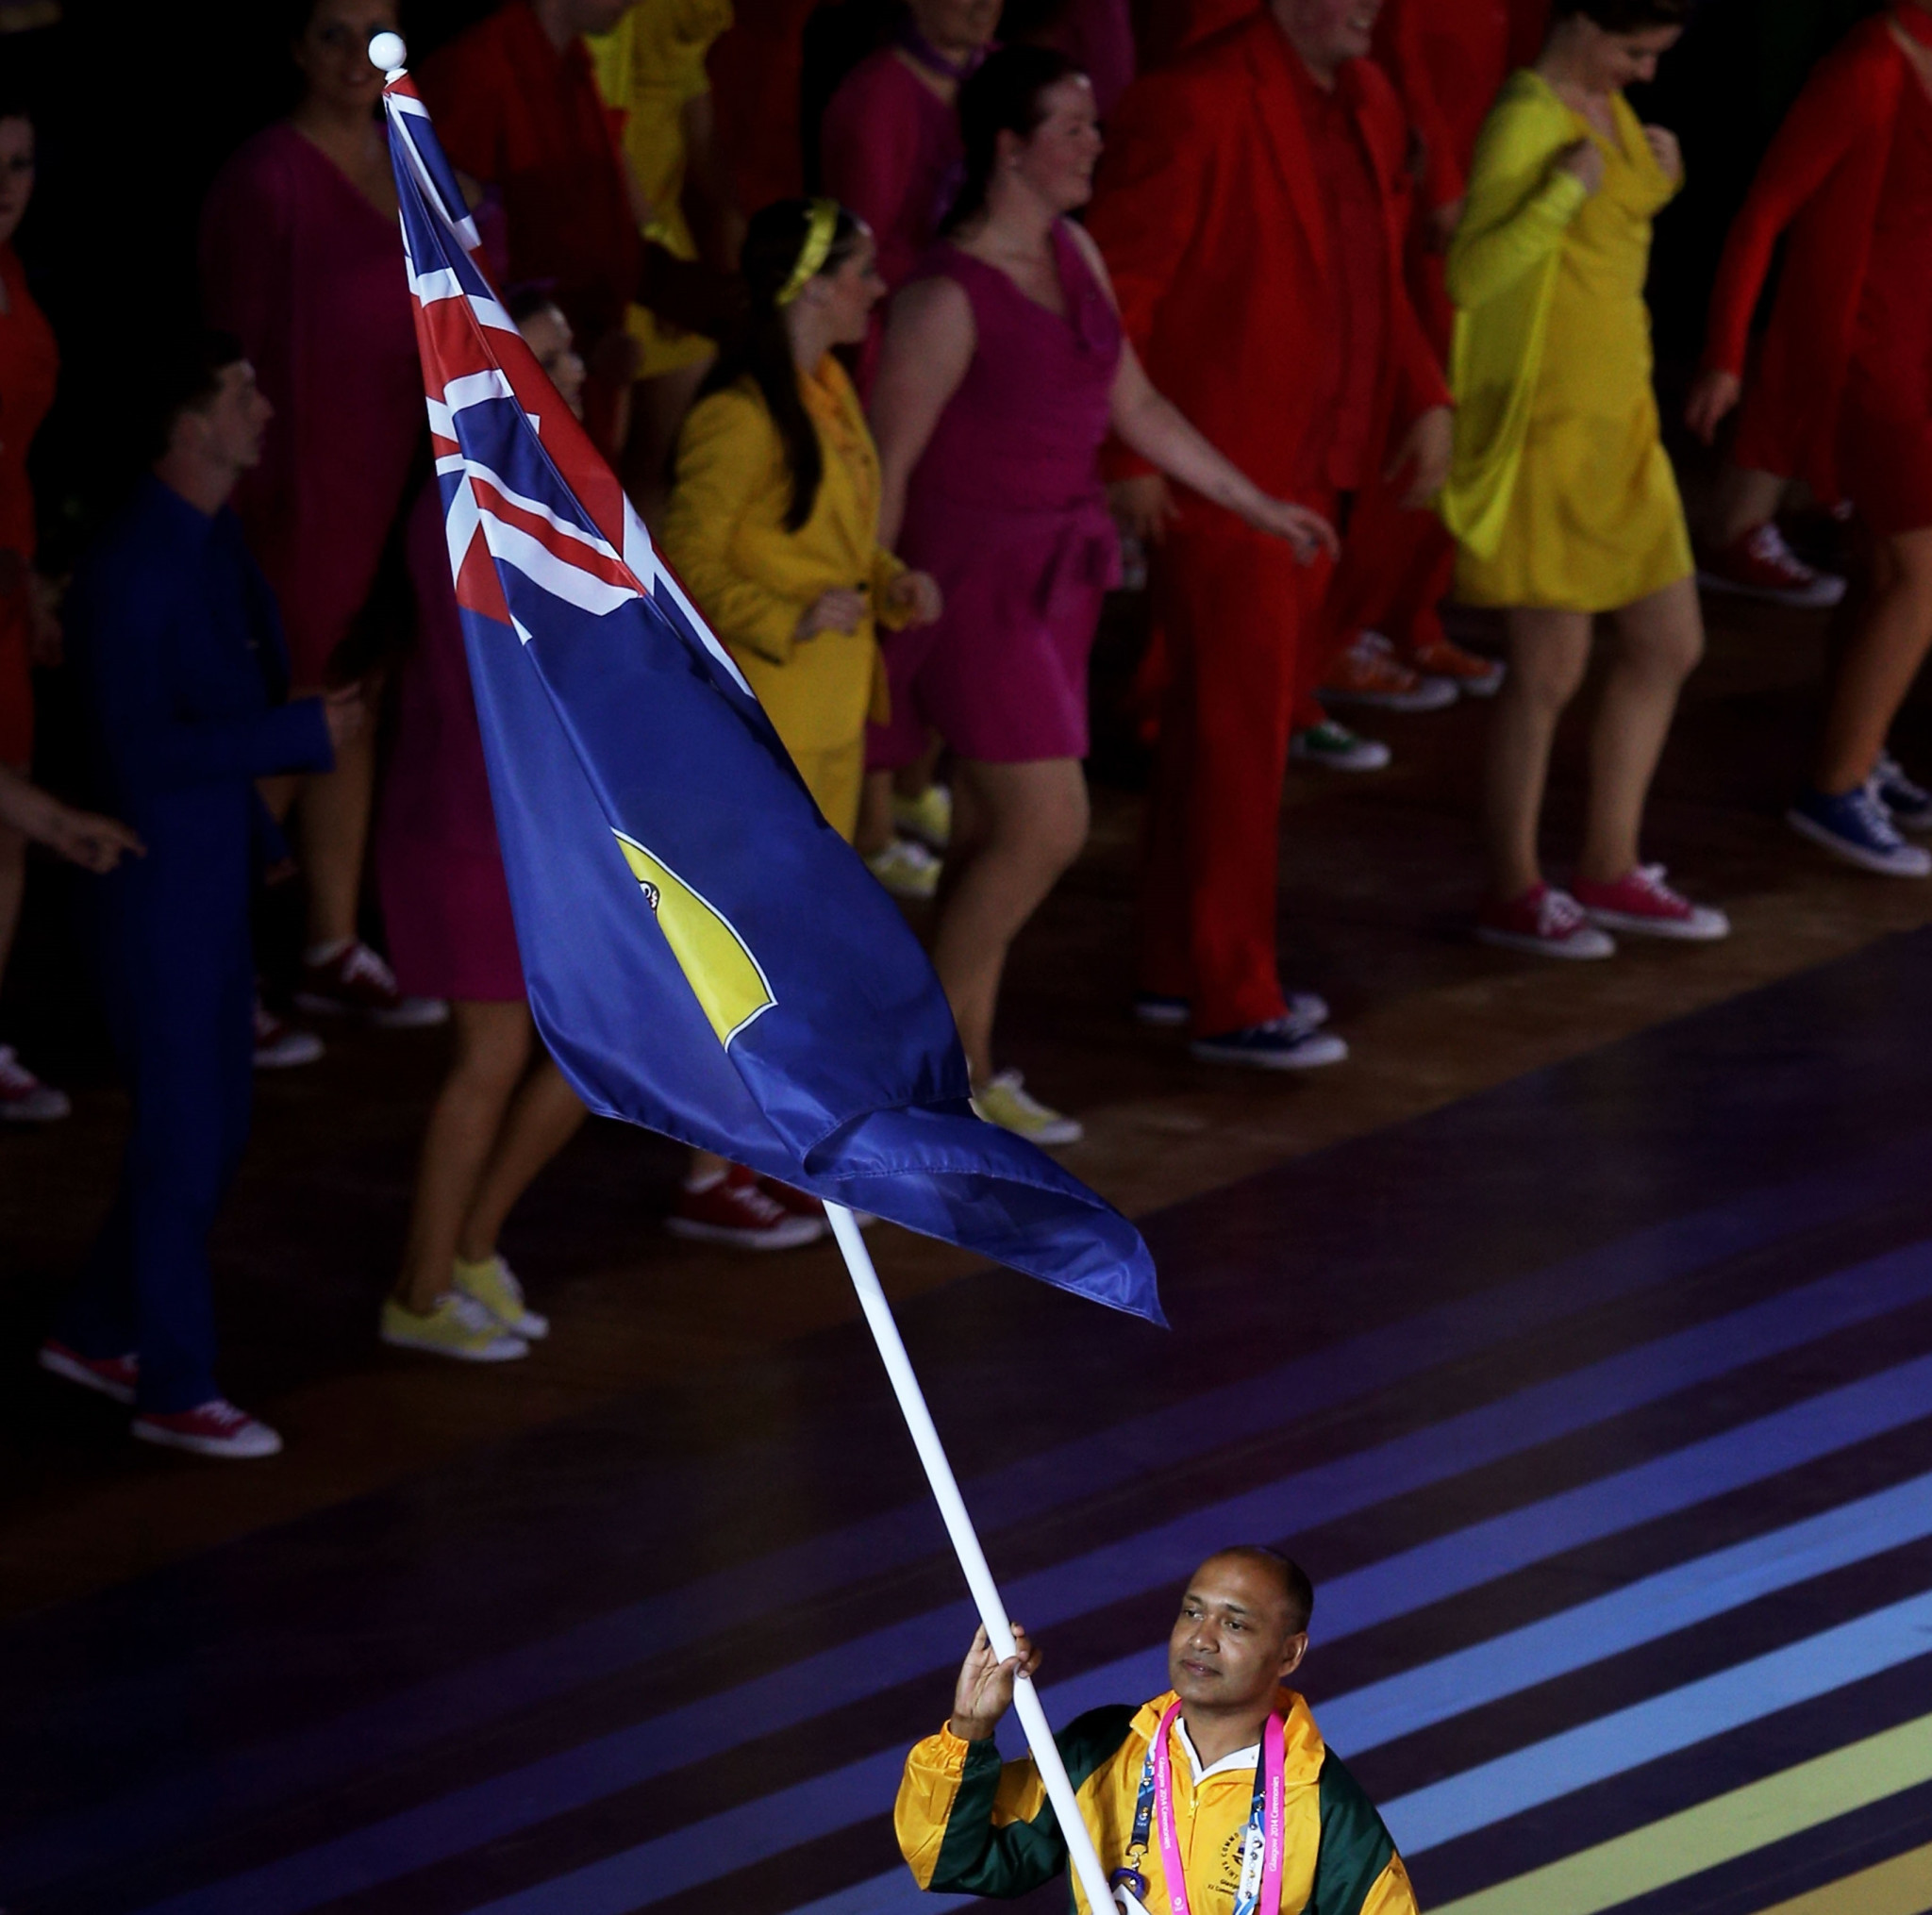 St Helena has named 11 athletes for Birmingham 2022 ©Getty Images